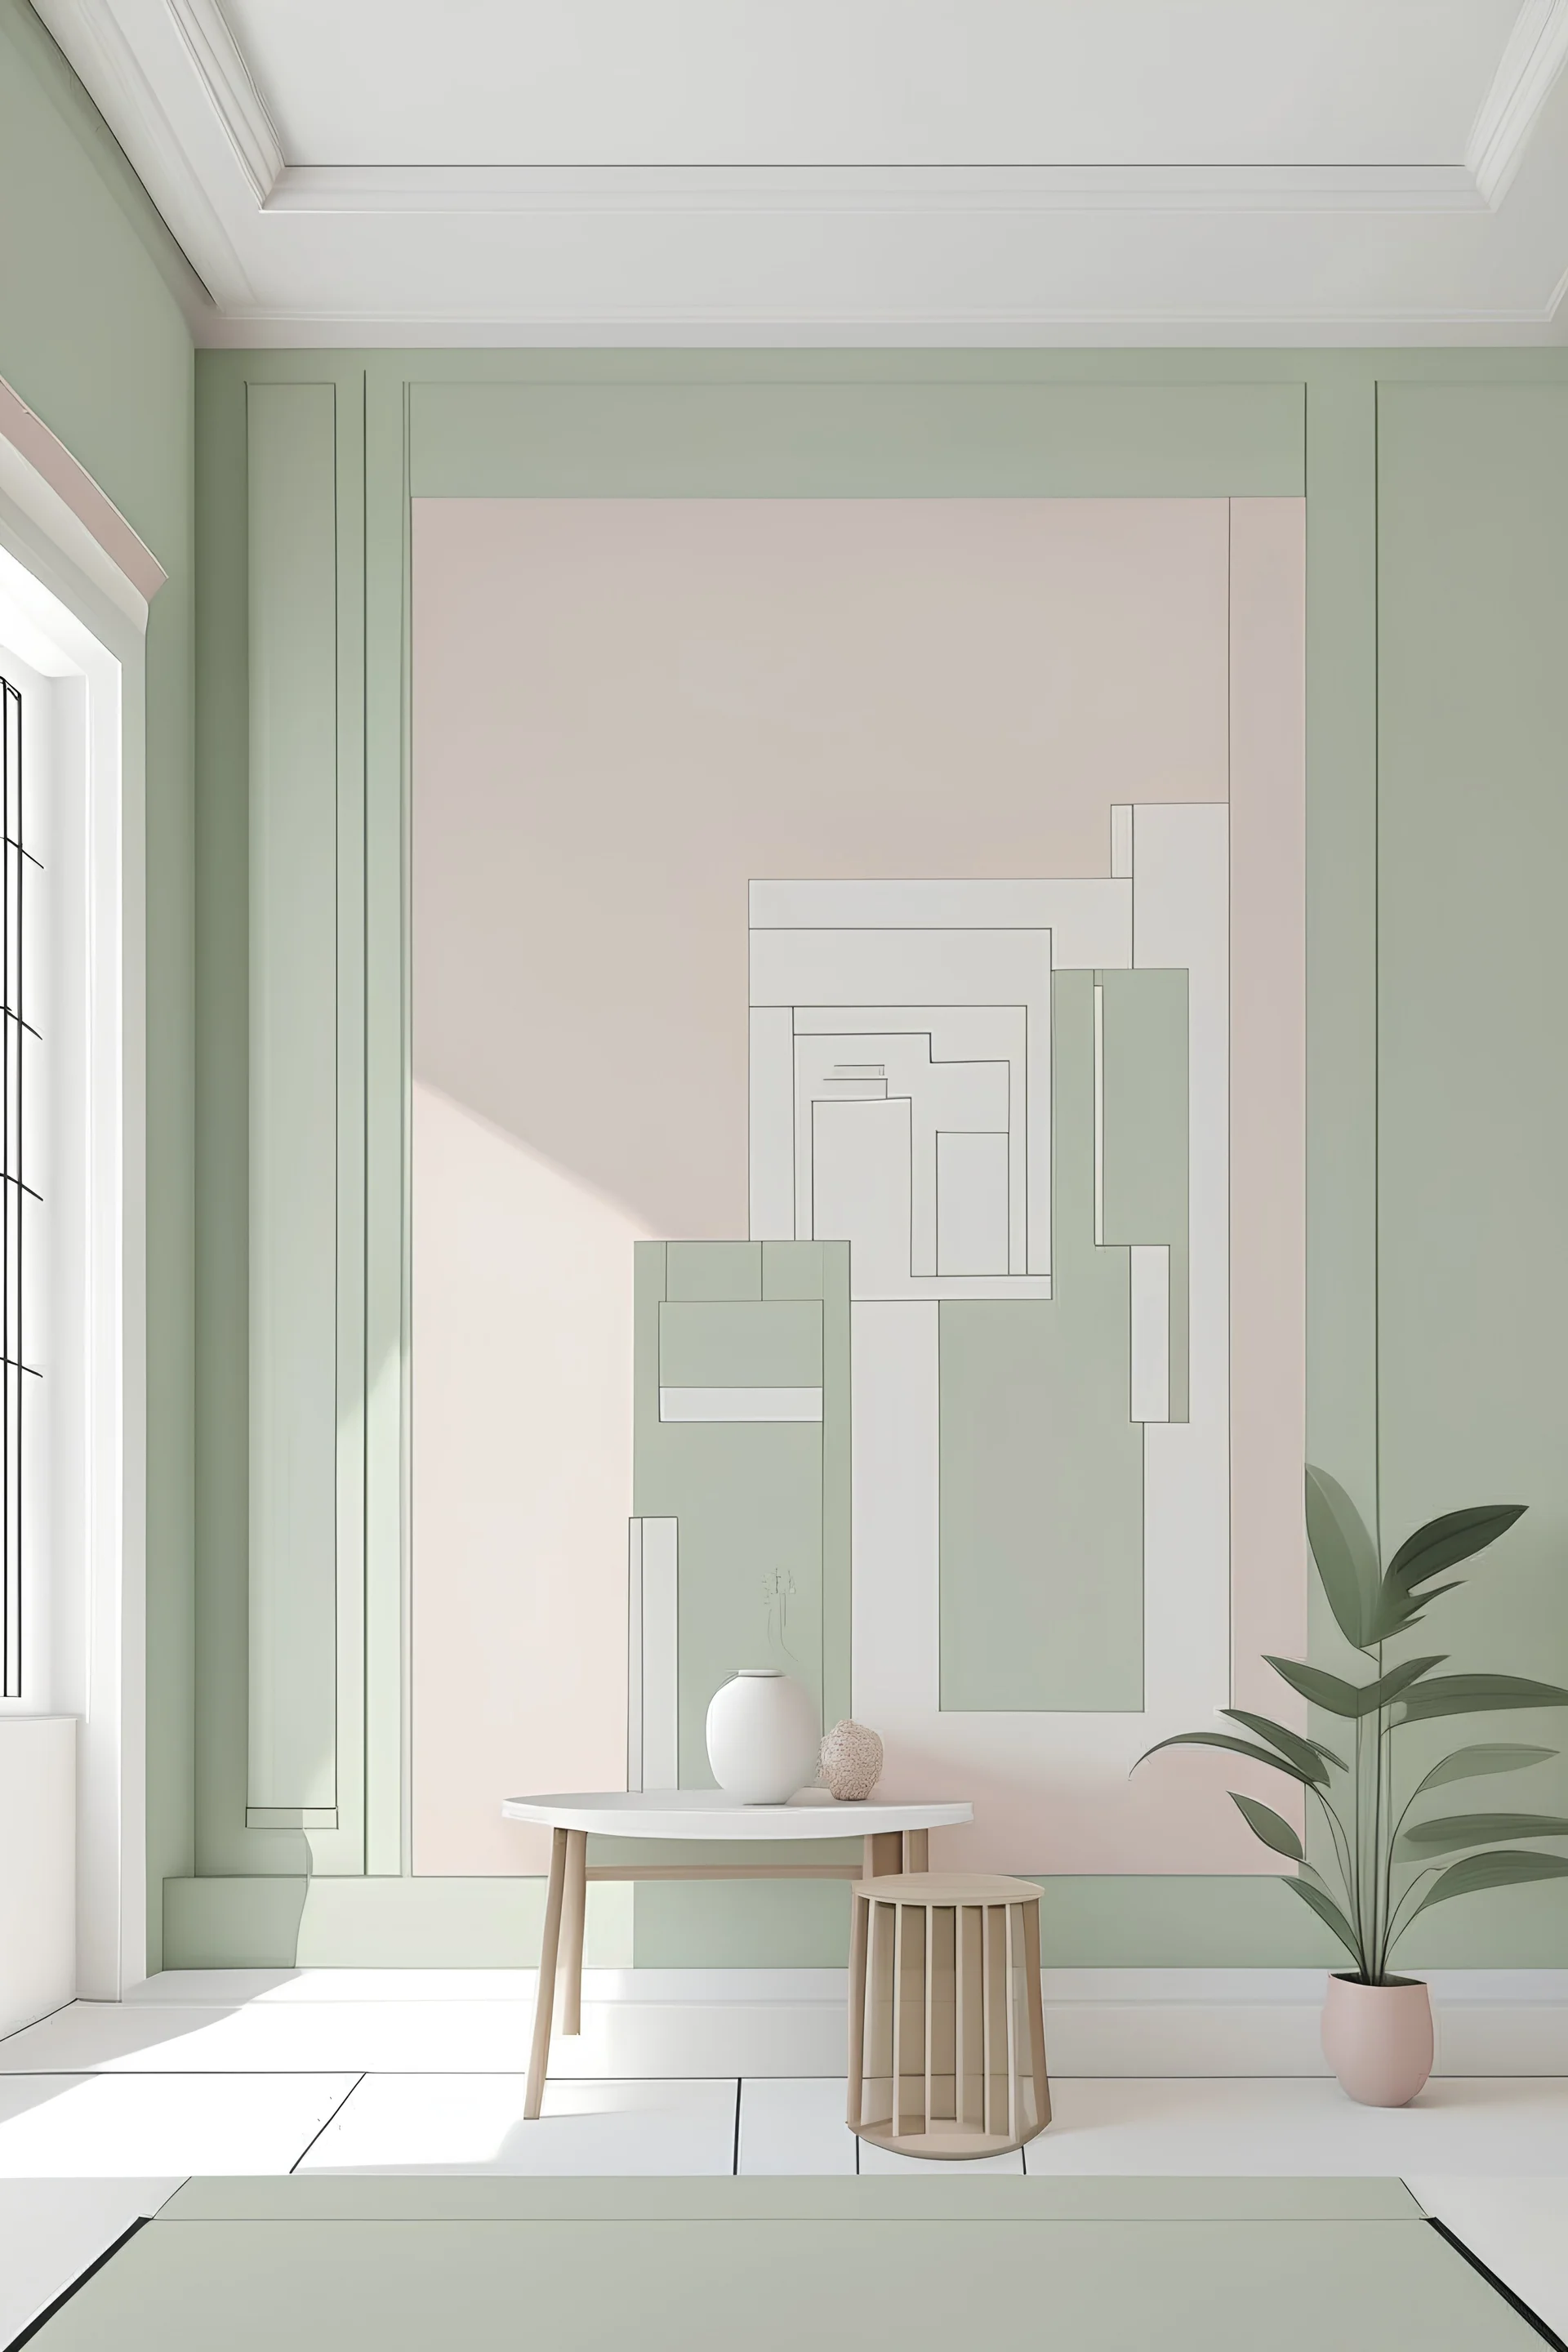 Create handpainted block colour wall mural with greek style. Opt for an earthy and muted color palette of sage green, pink, beige, and white for a calming.